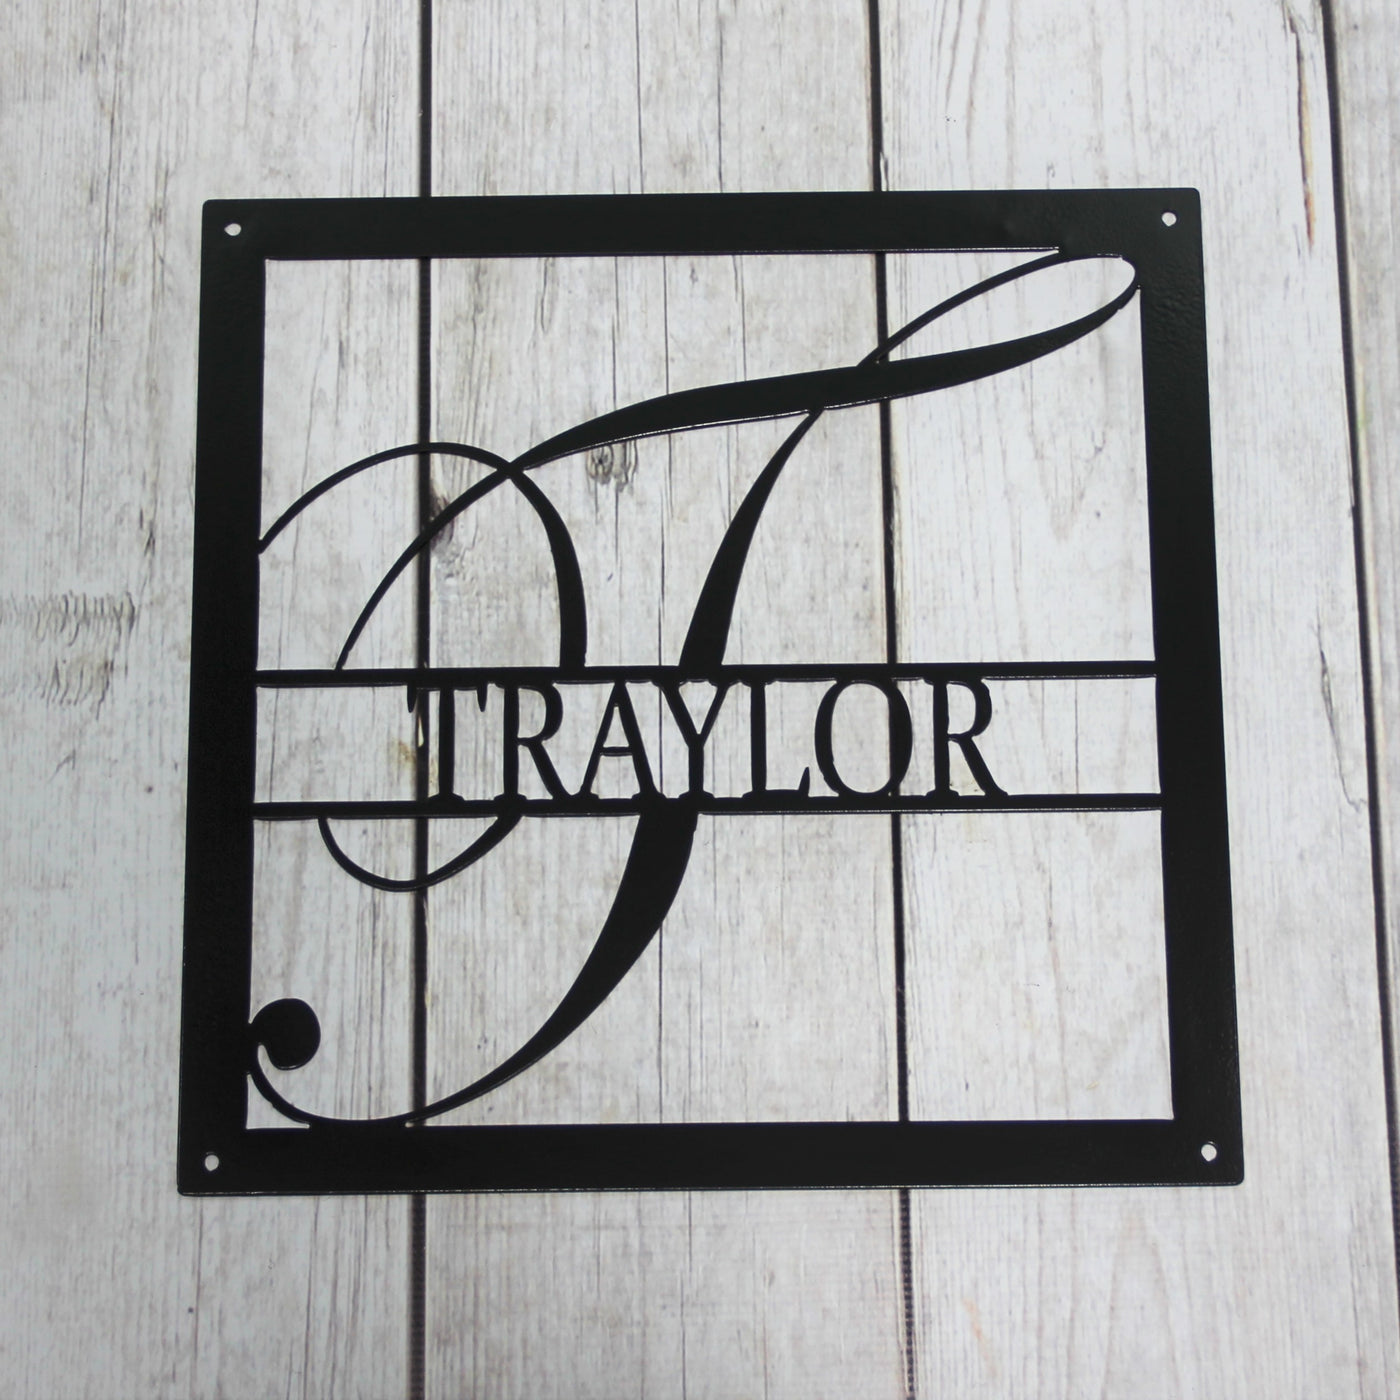 Personalized Elegant Square Monogram Metal Sign with Name - Madison Iron and Wood - Monogram Sign - metal outdoor decor - Steel deocrations - american made products - veteran owned business products - fencing decorations - fencing supplies - custom wall decorations - personalized wall signs - steel - decorative post caps - steel post caps - metal post caps - brackets - structural brackets - home improvement - easter - easter decorations - easter gift - easter yard decor